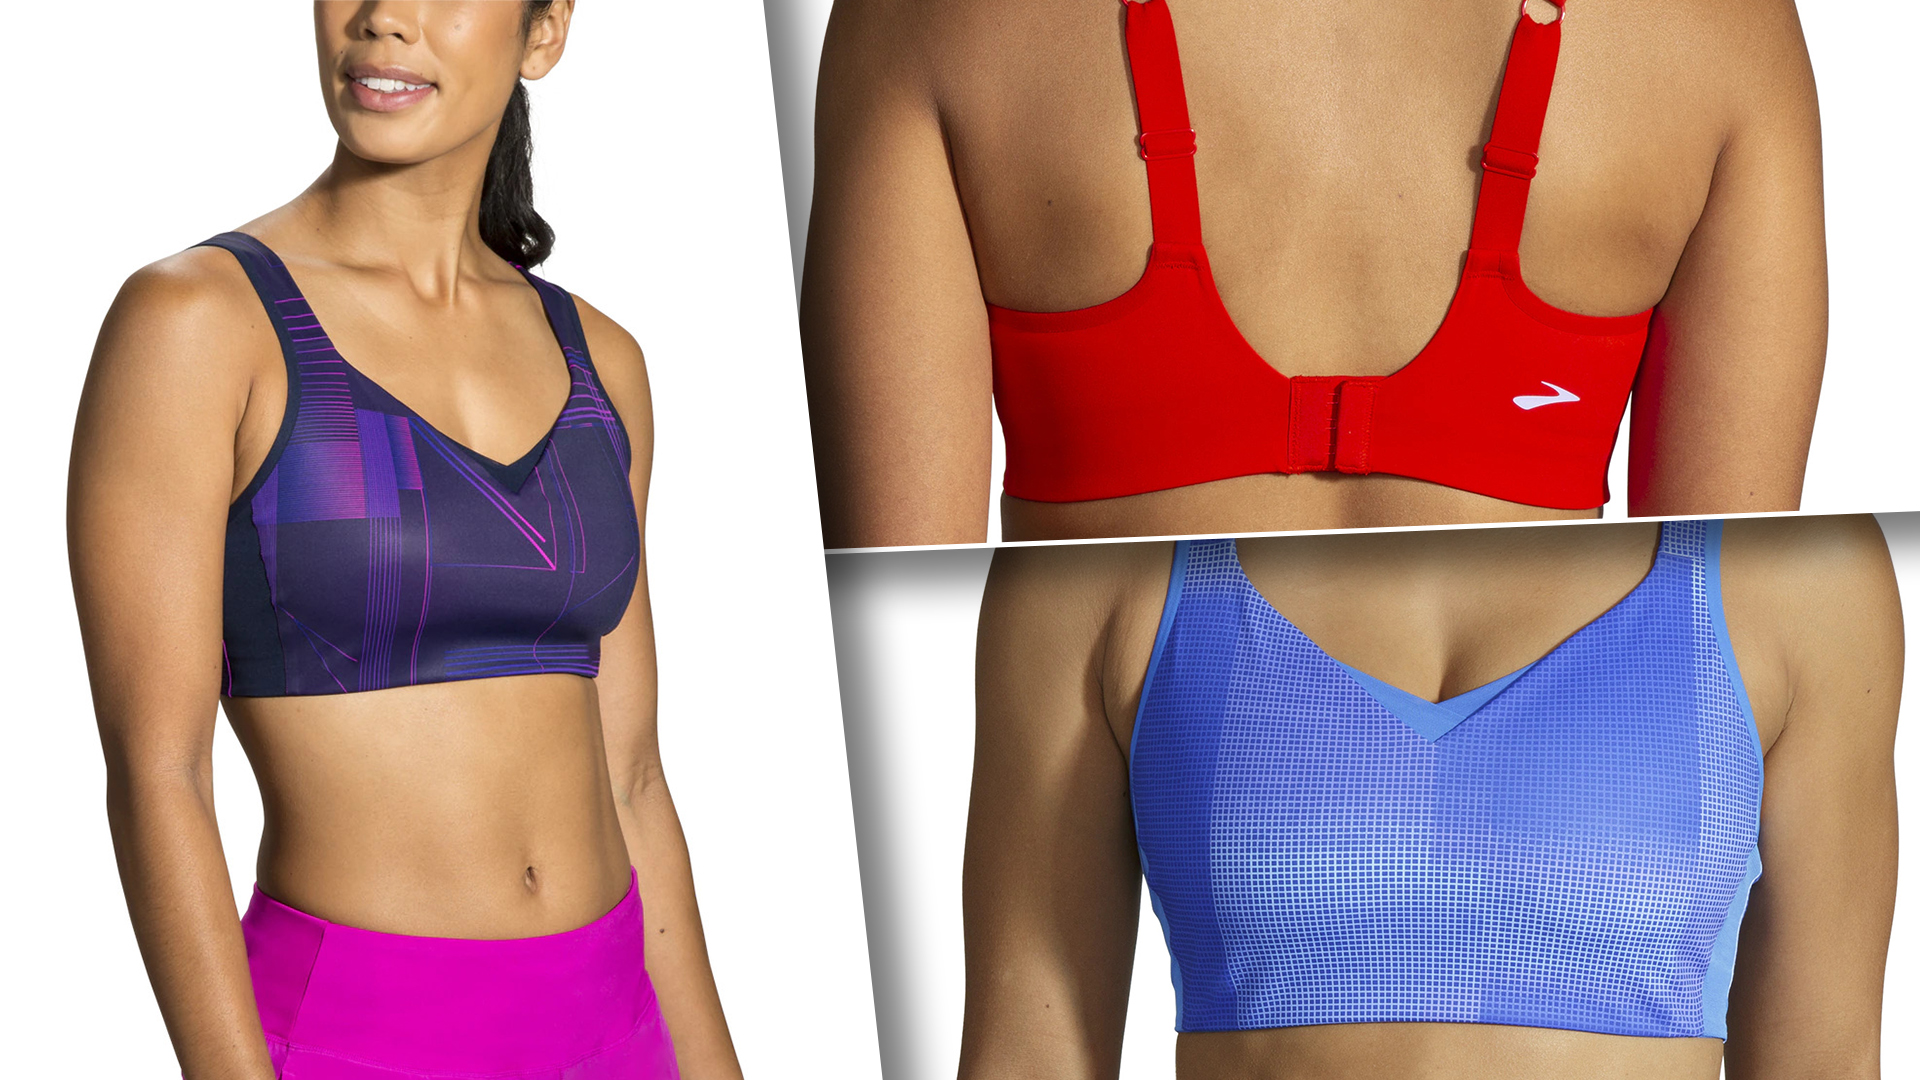 Women's Polyester / Spandex Bra for Fitness - Active Ladies